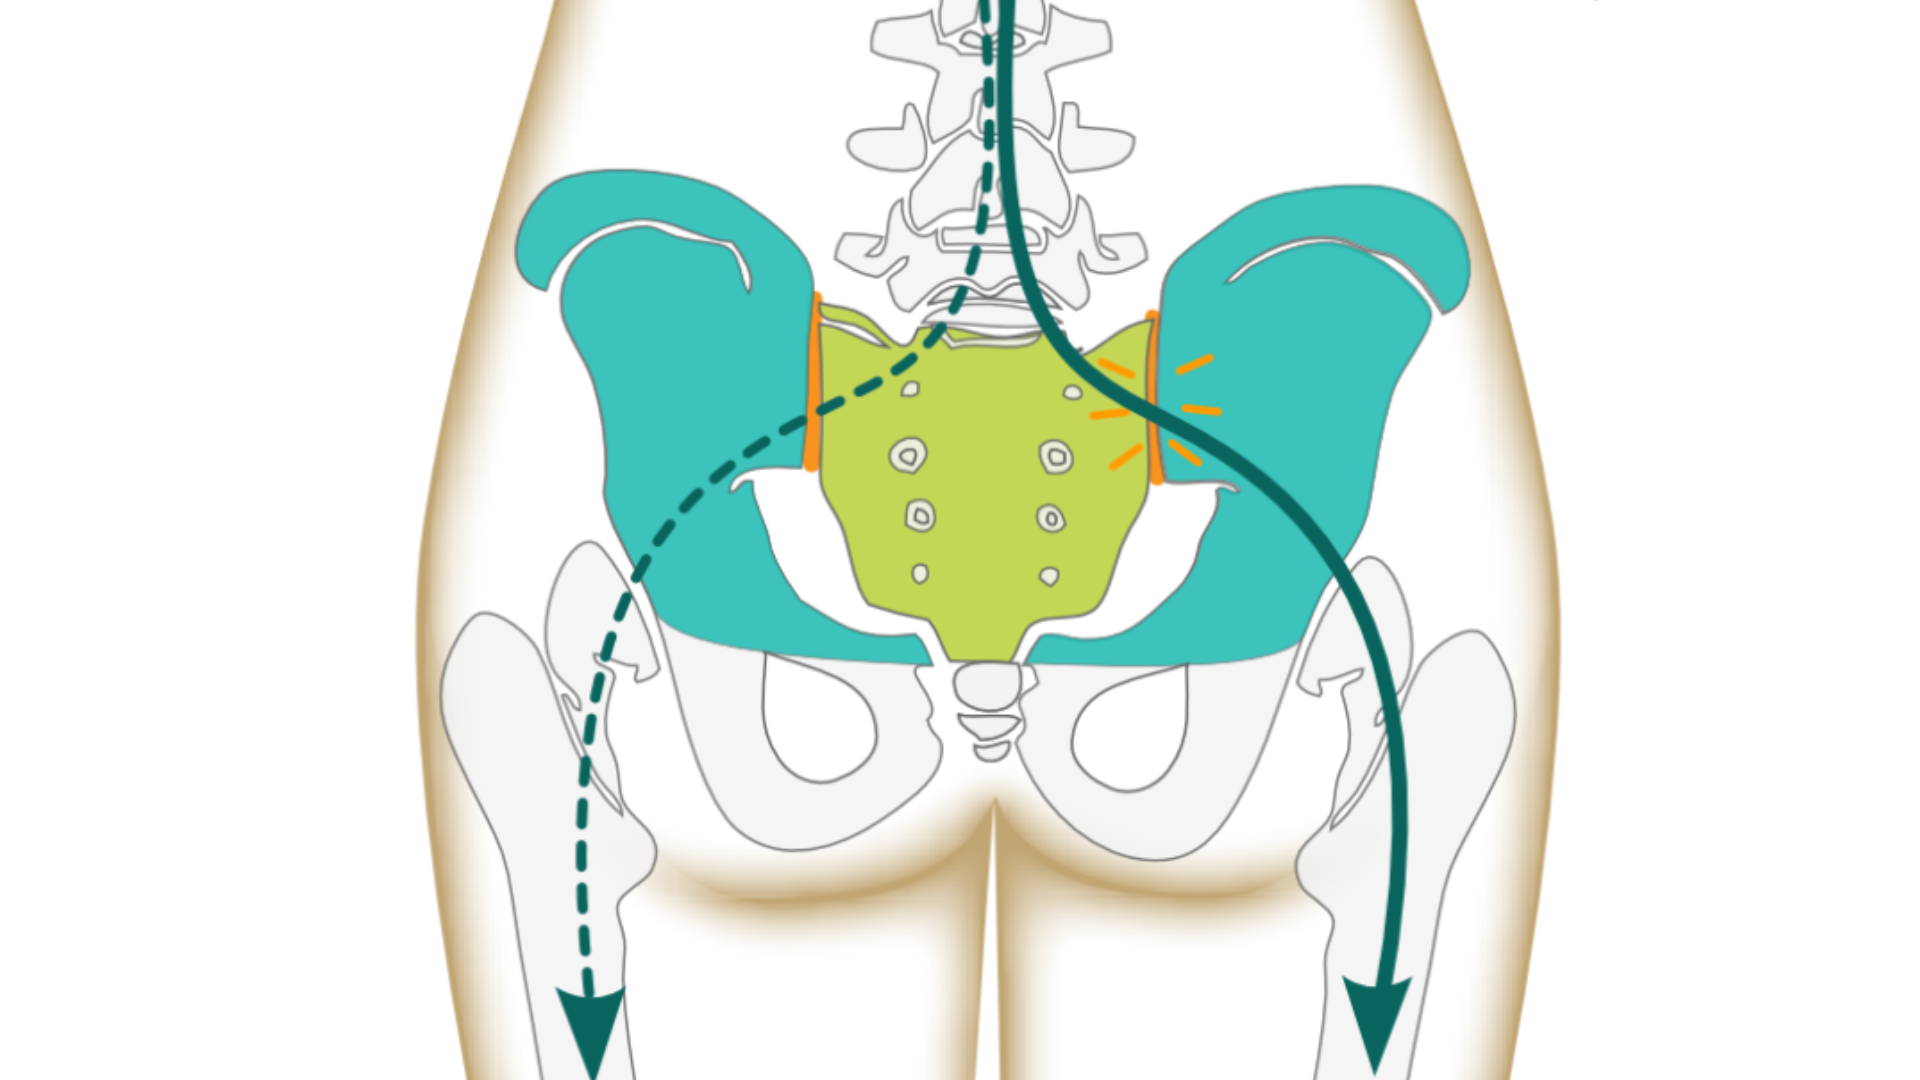 Image depicts a stable sacrum with concept of sacroiliac joint dysfunction that can affect lower back pain in both women and men, but women generally are at higher risk because of hormonal changes their bodies go through